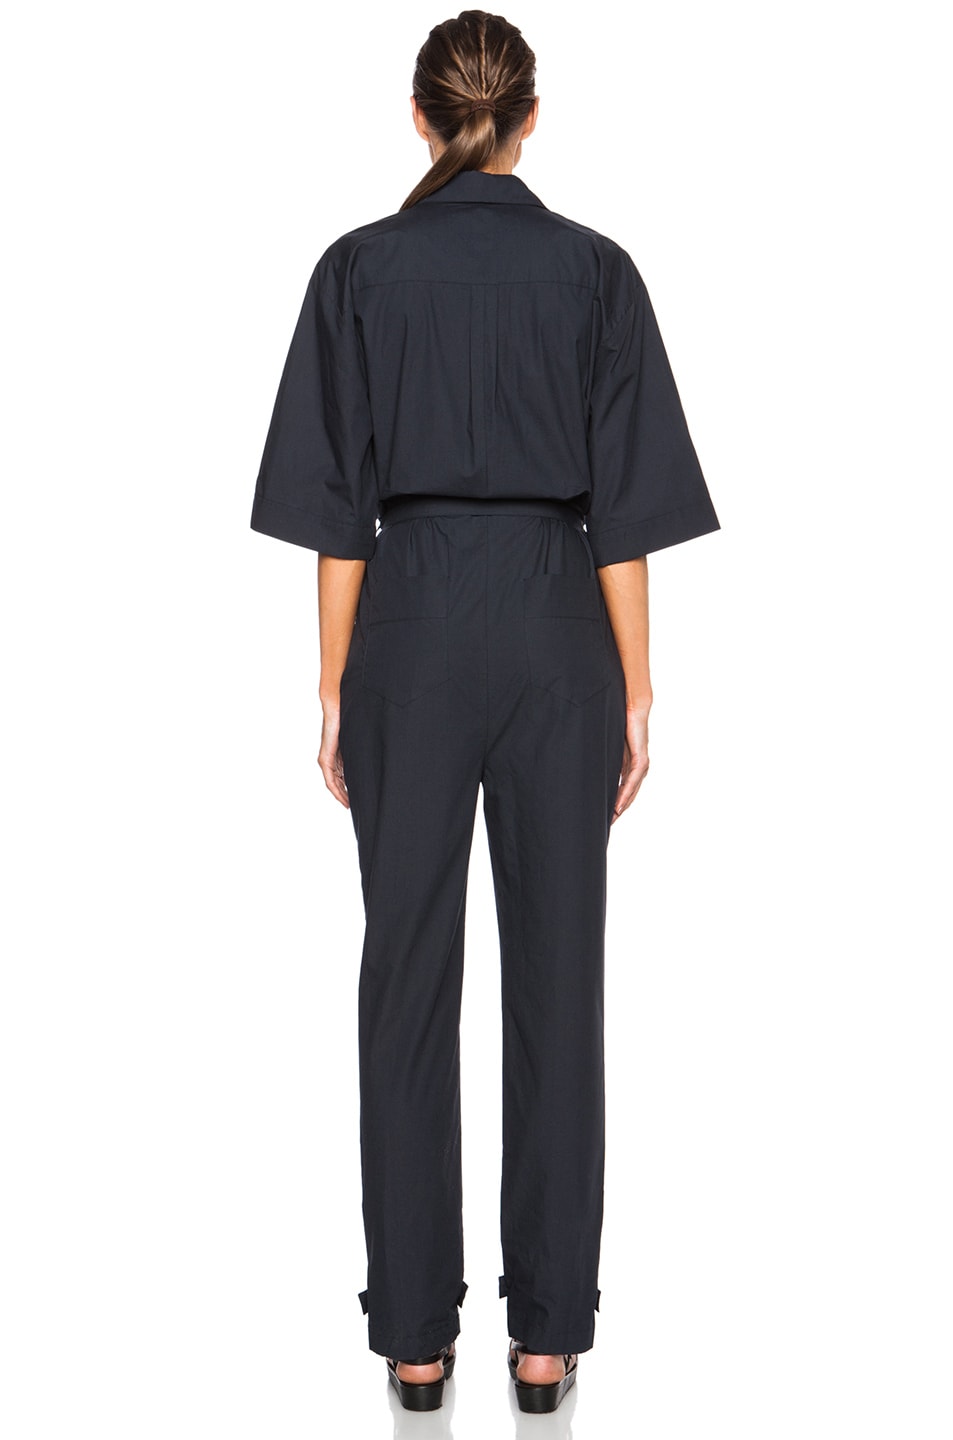 Band of Outsiders Utility Cotton Jumpsuit in Classic Navy | FWRD